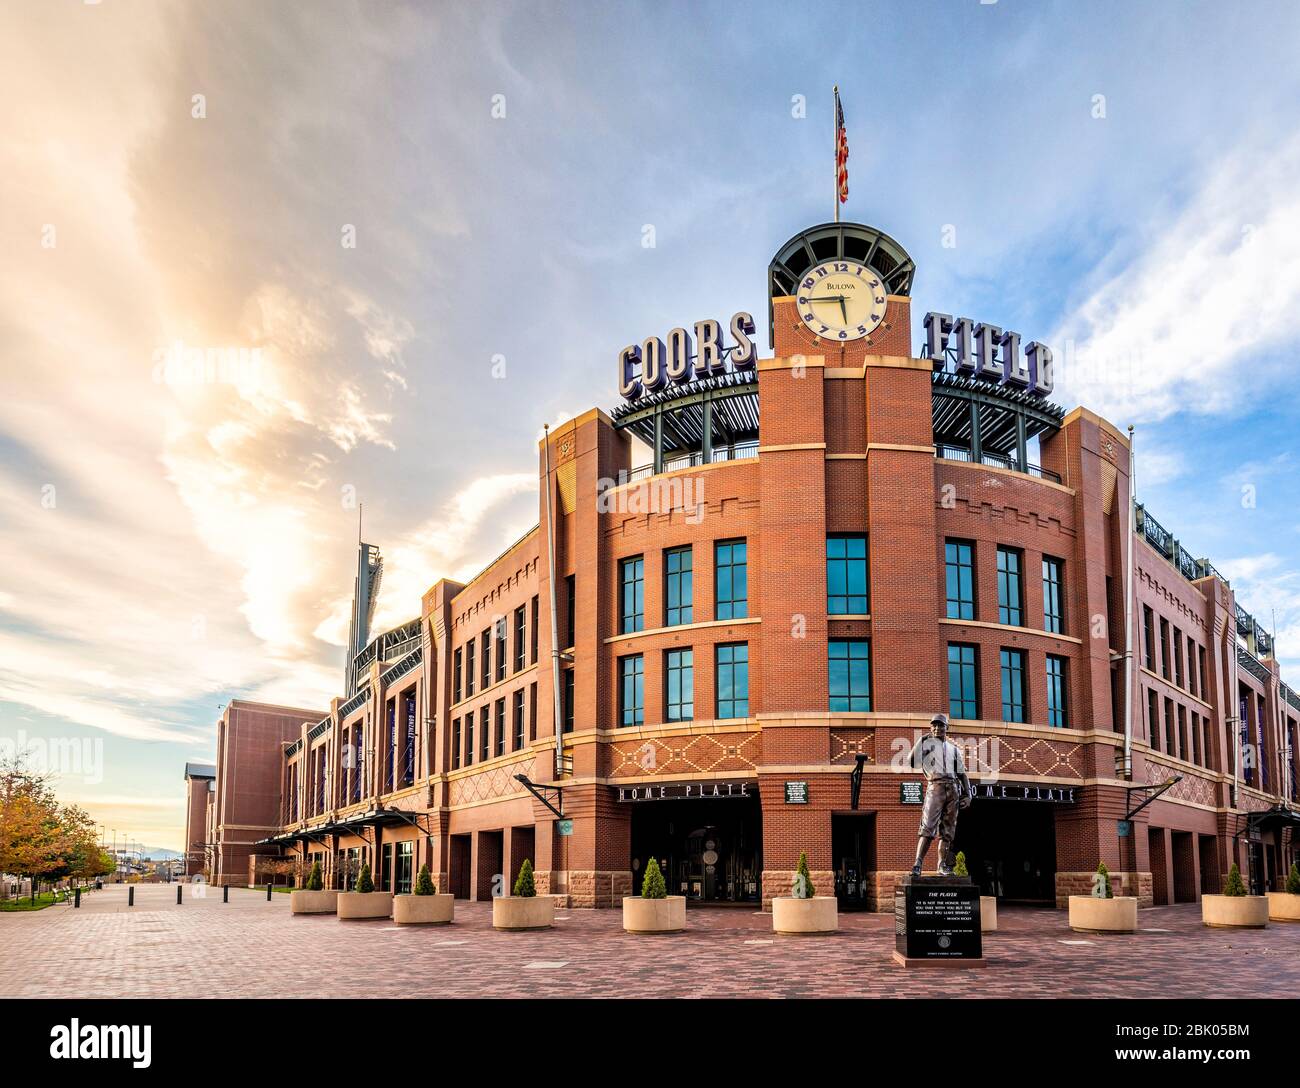 The entrance to Coors Field, home of the Colorado Rockies, in Denver, Colorado, USA. Stock Photo